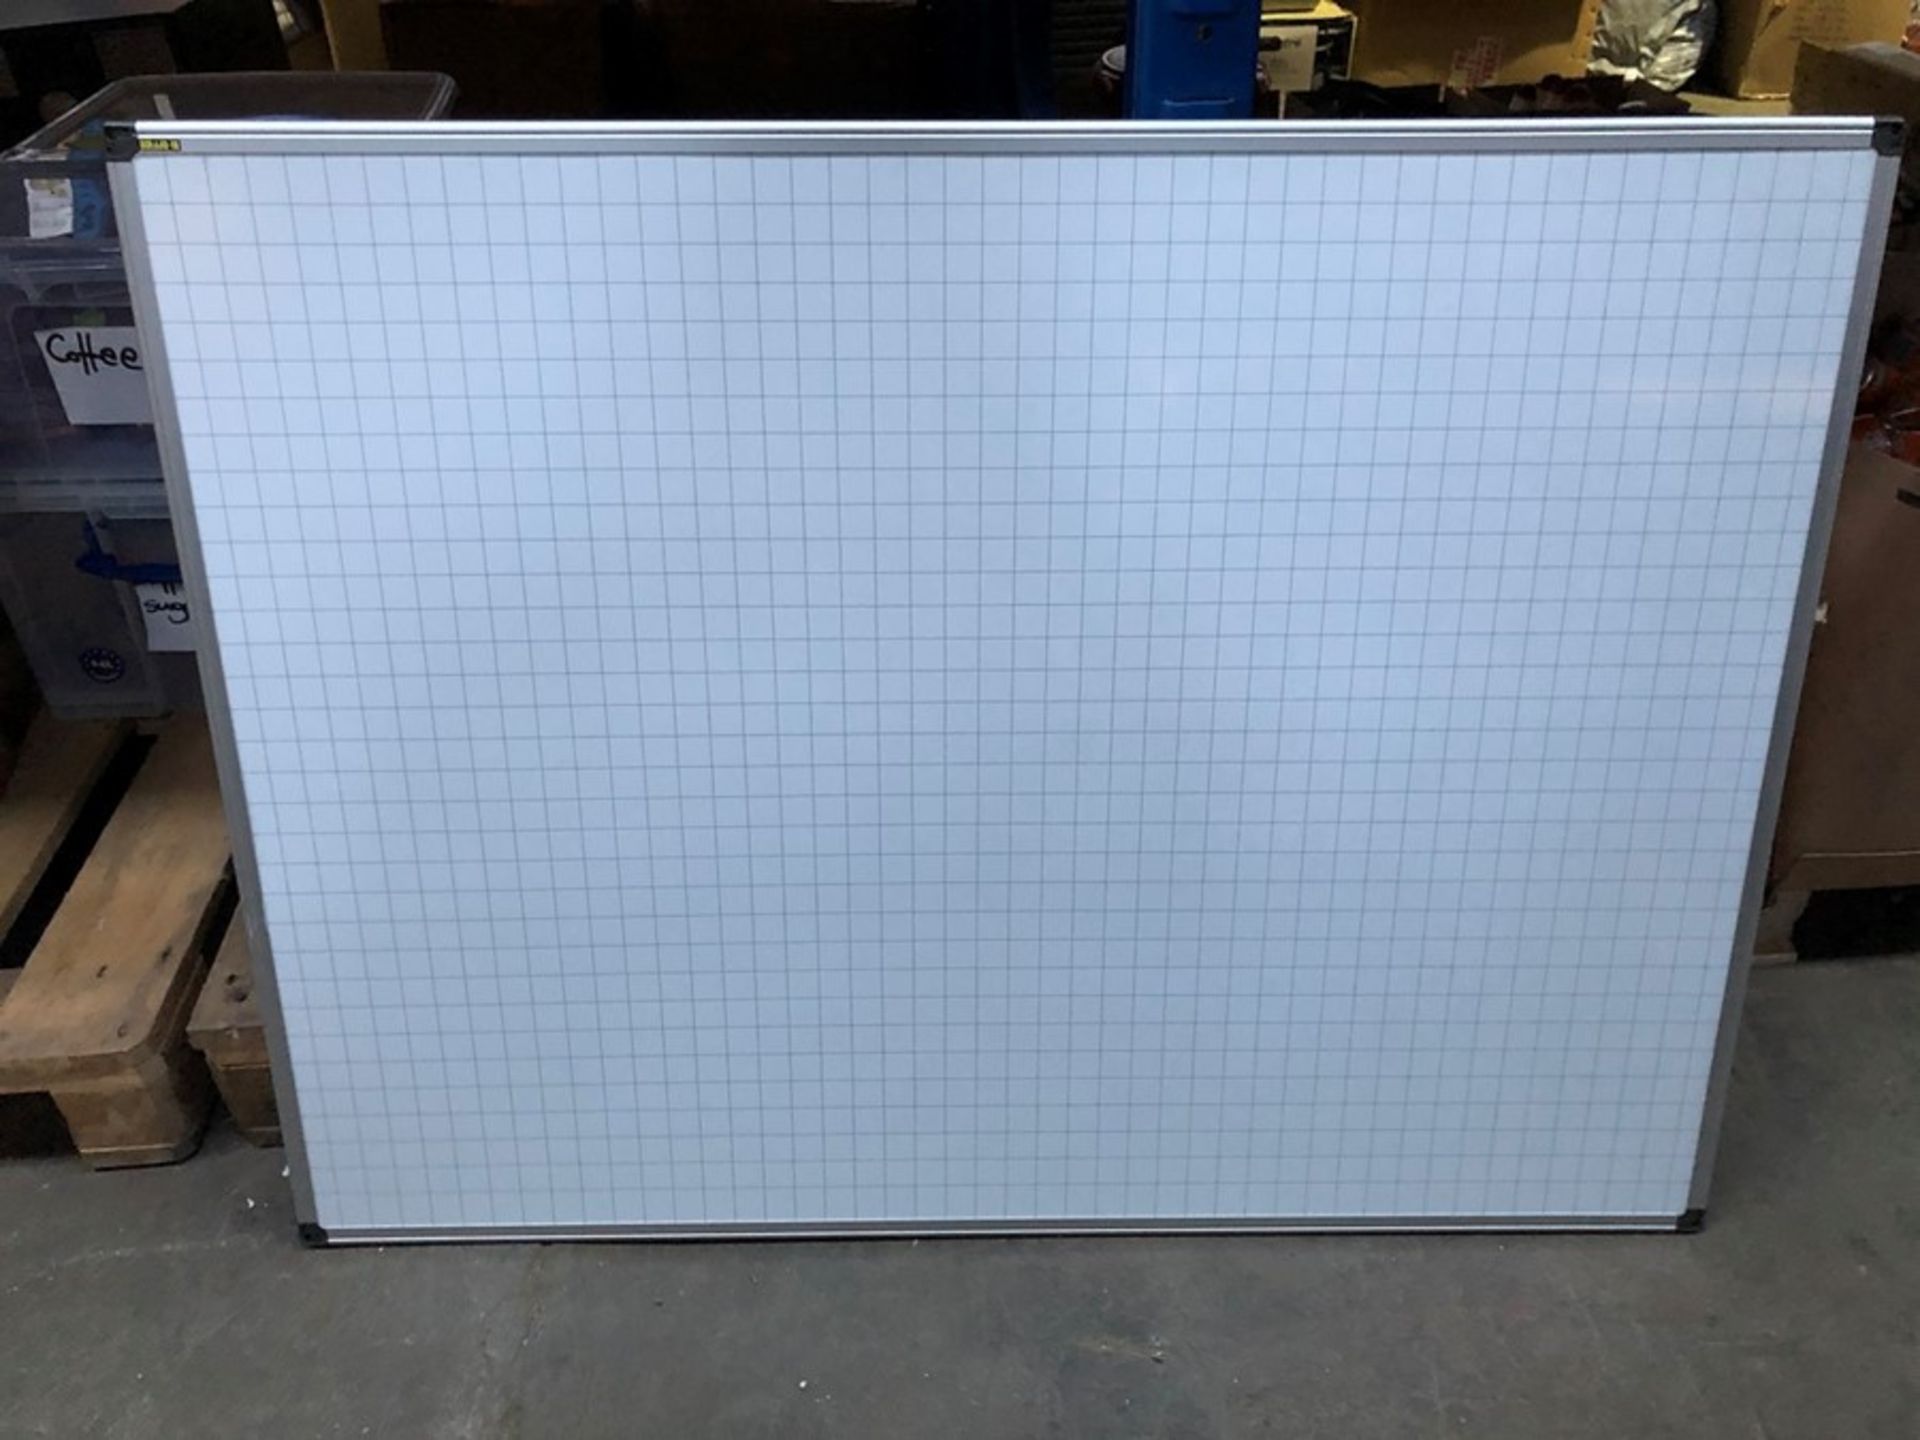 1 LARGE BI-OFFICE GRIDLINE WHITE BOARD (PUBLIC VIEWING AVAILABLE)